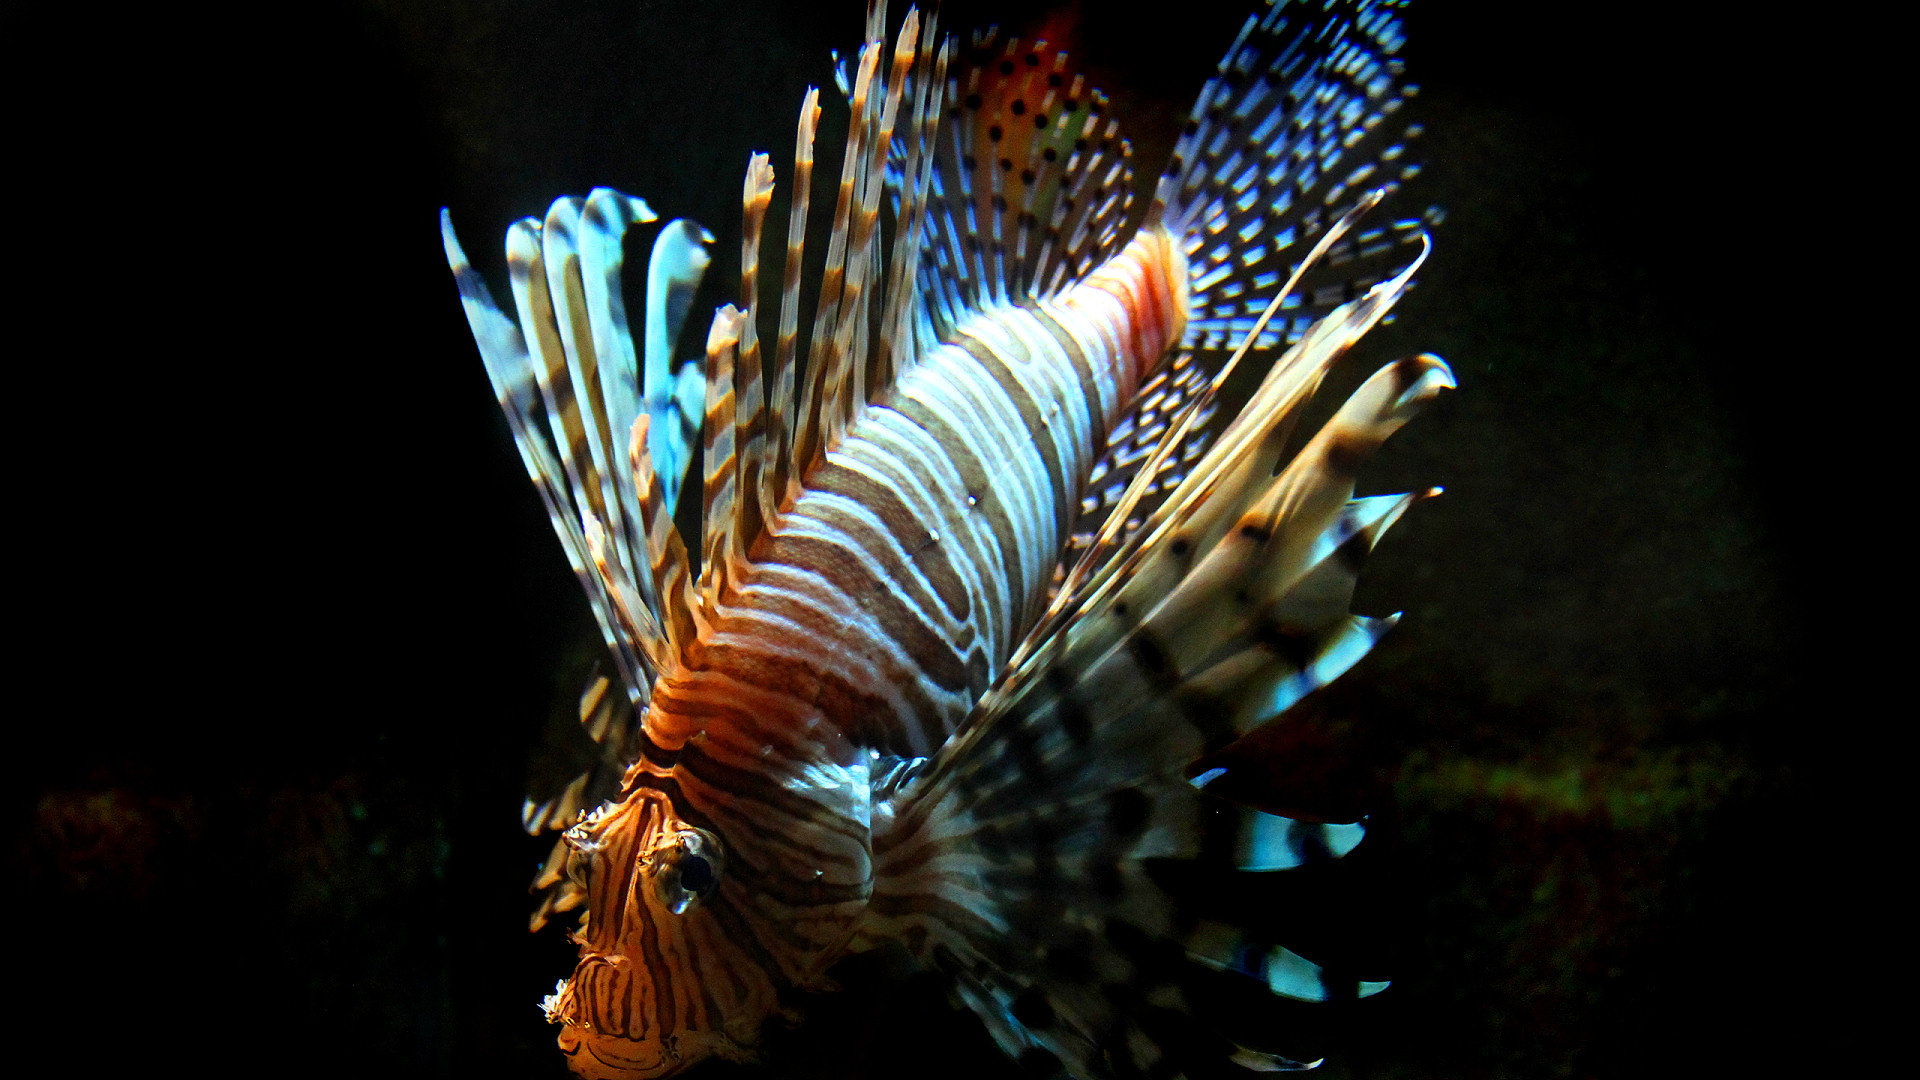 Download full hd 1920x1080 Lionfish desktop background ID:438218 for free